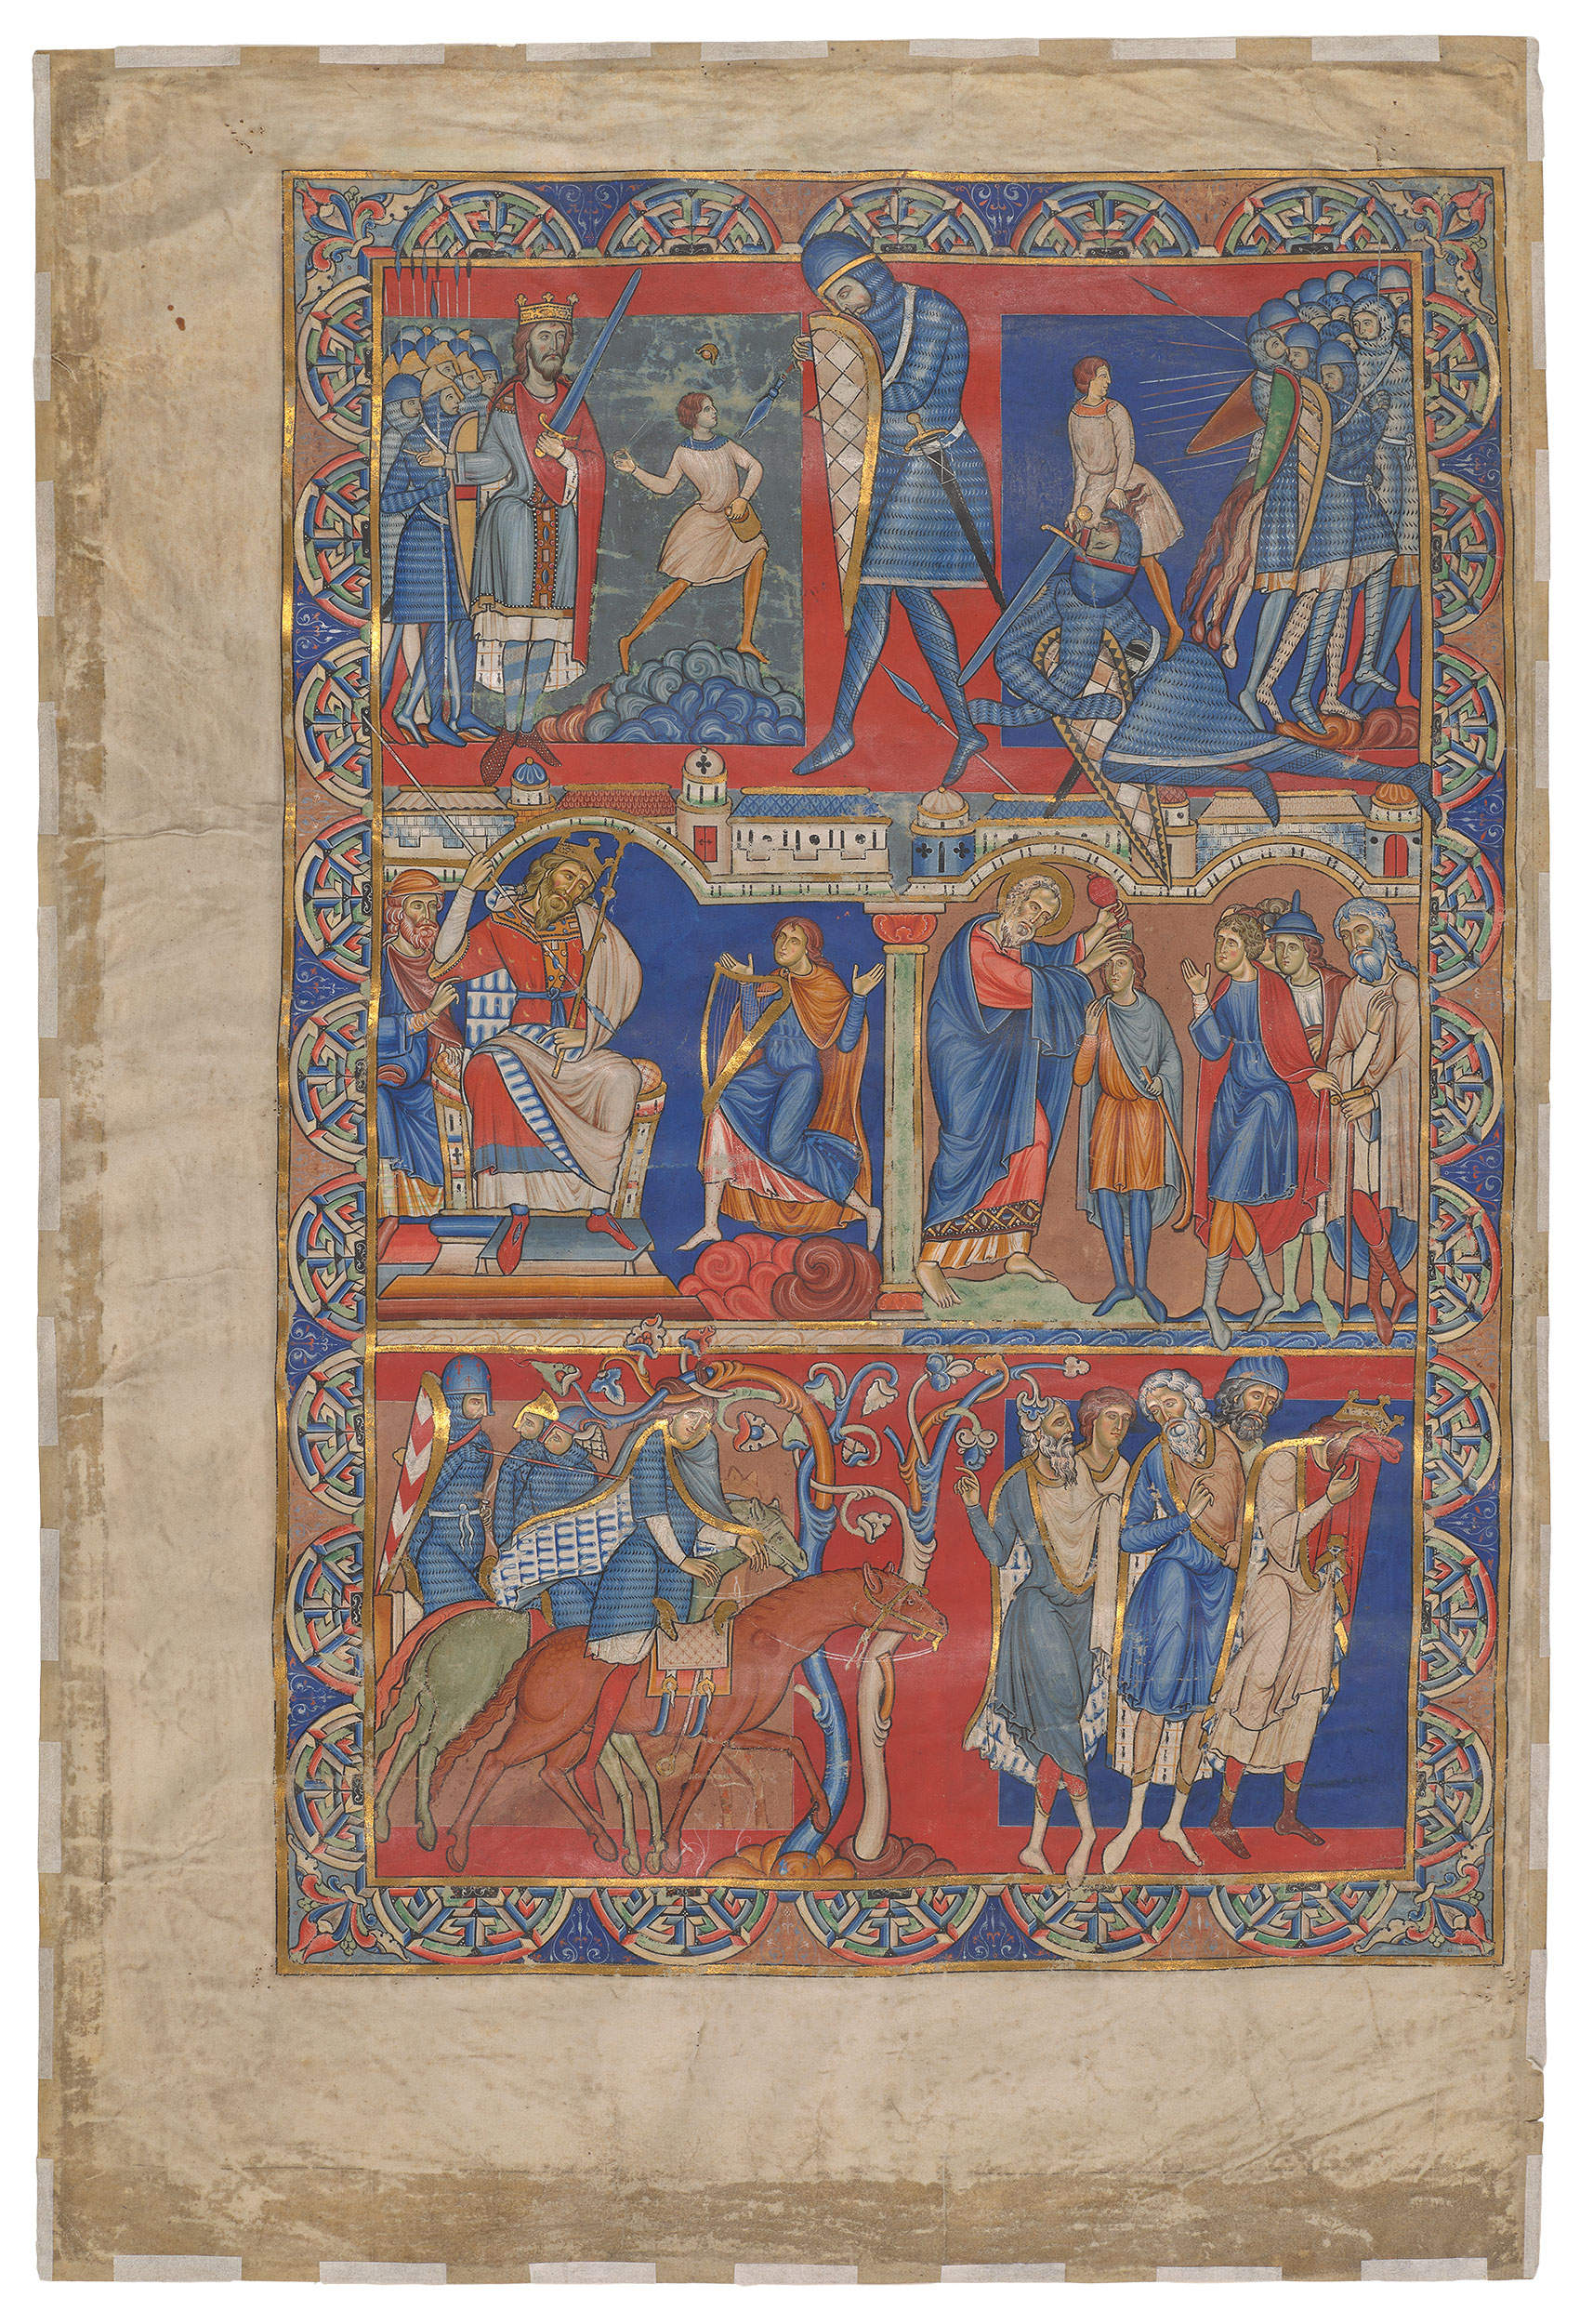 Book of Samuel Single Leaf, Winchester Bible by Unknown Artist - c. 1160 – 1180 - 580 x 390 mm The Morgan Library & Museum